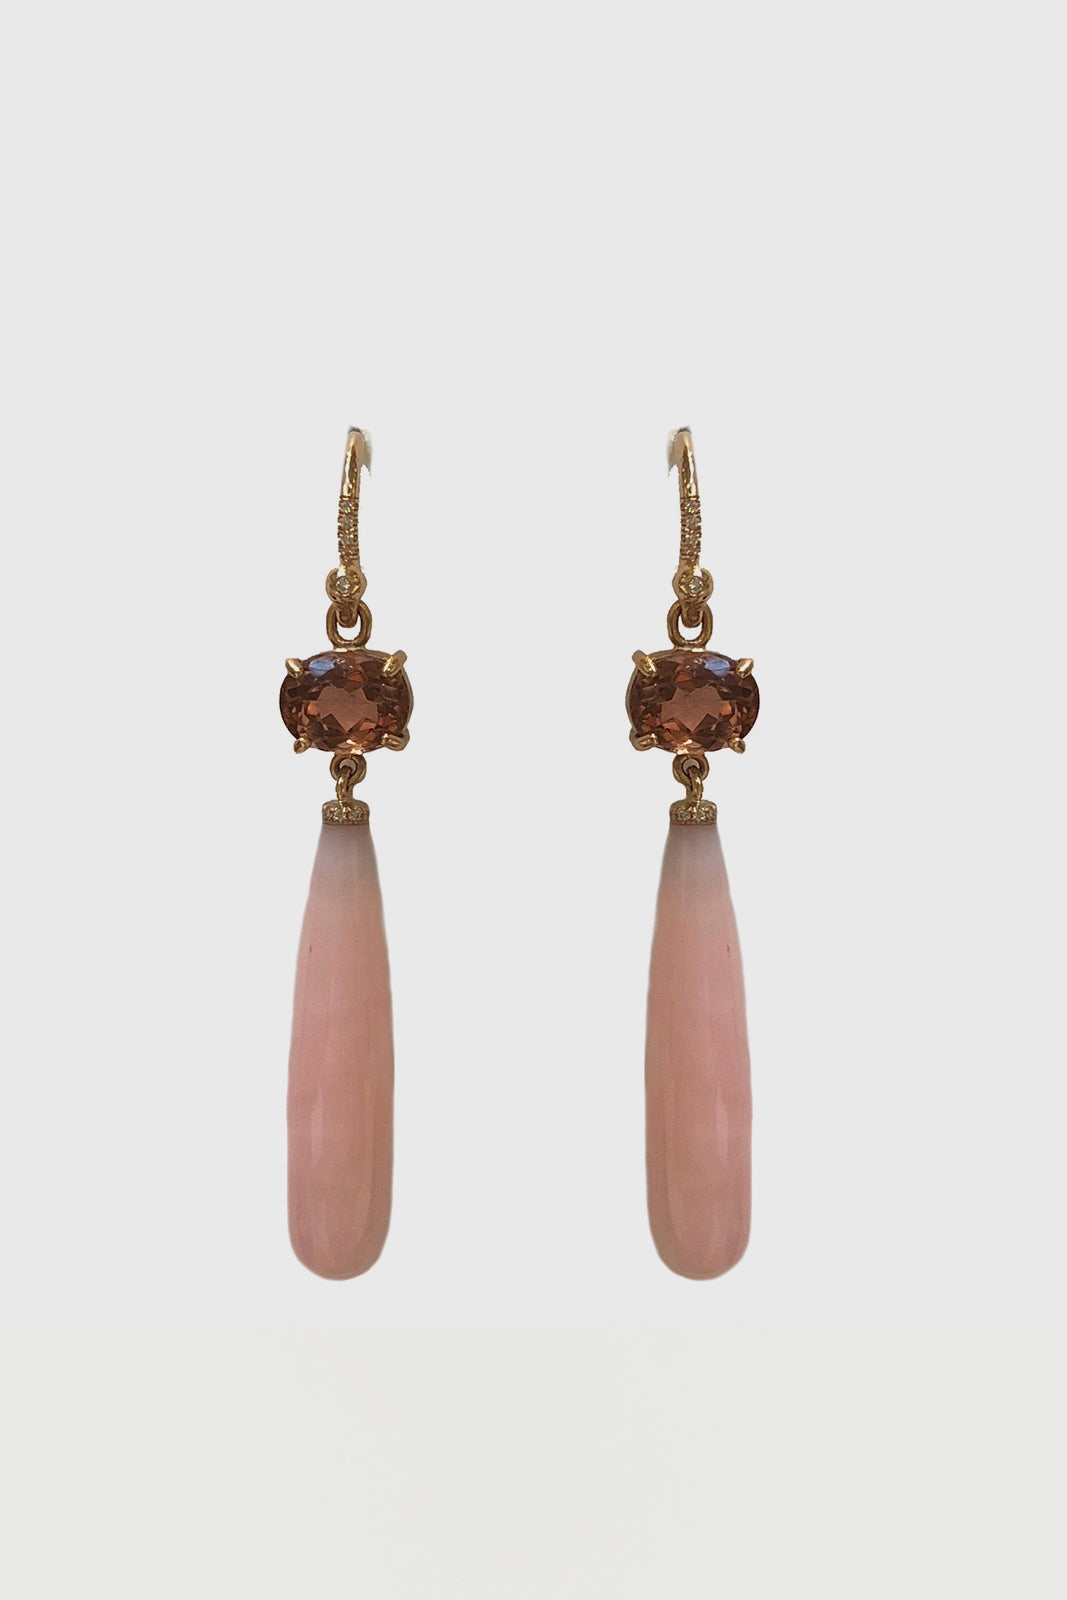 18K Rose Gold Earrings Set with Pink Tourmaline (3.52cts), 32 x 7mm Pink Opal, and Diamond Pave (0.05cts)